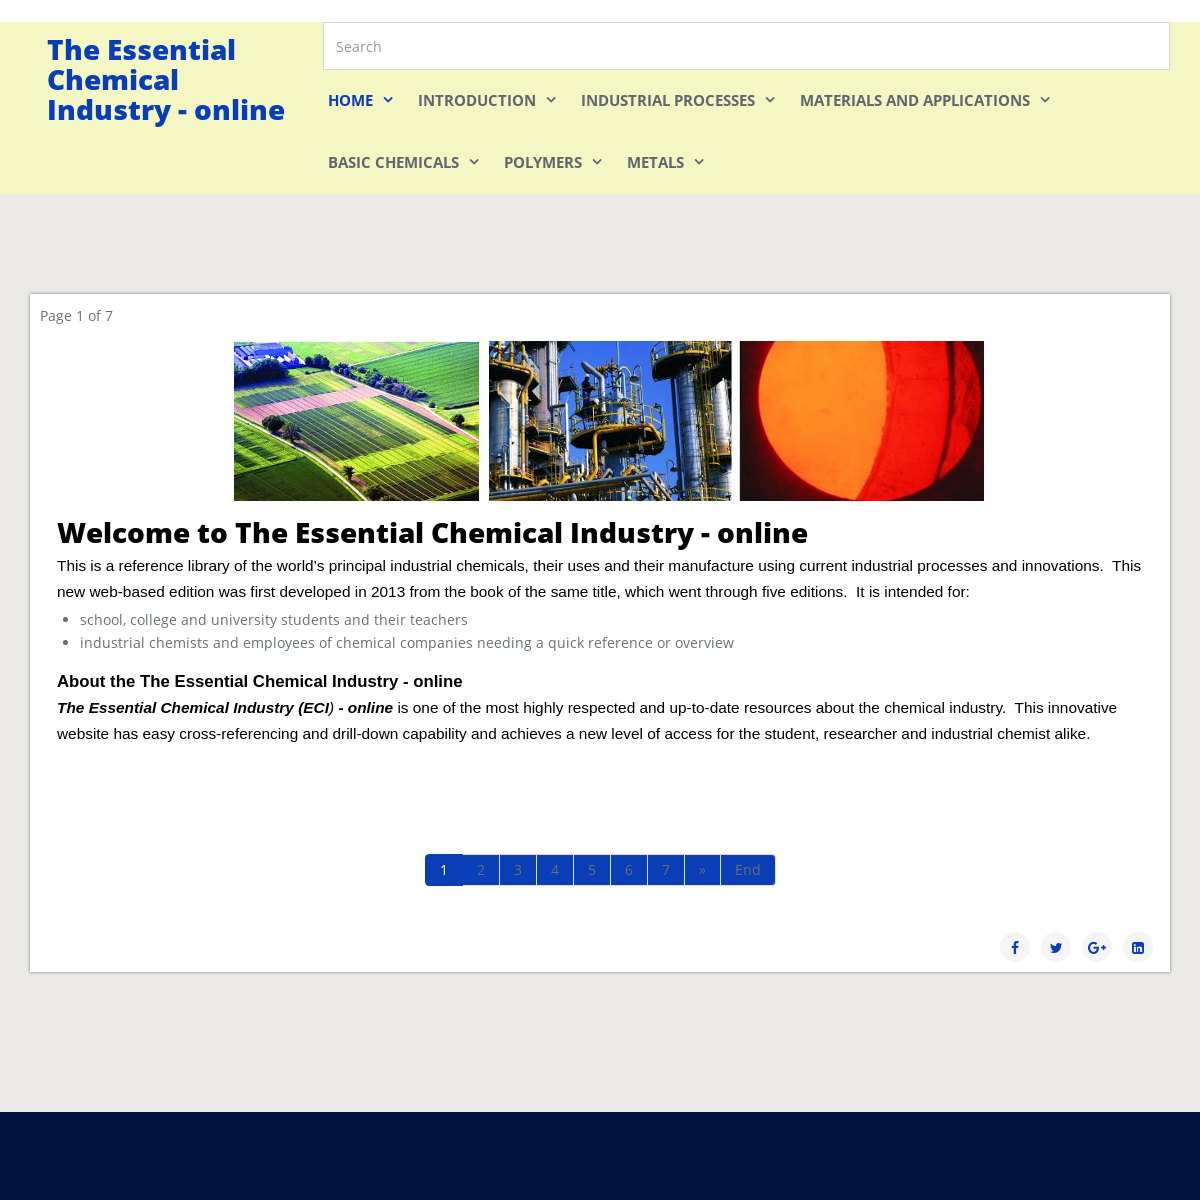 A complete backup of essentialchemicalindustry.org